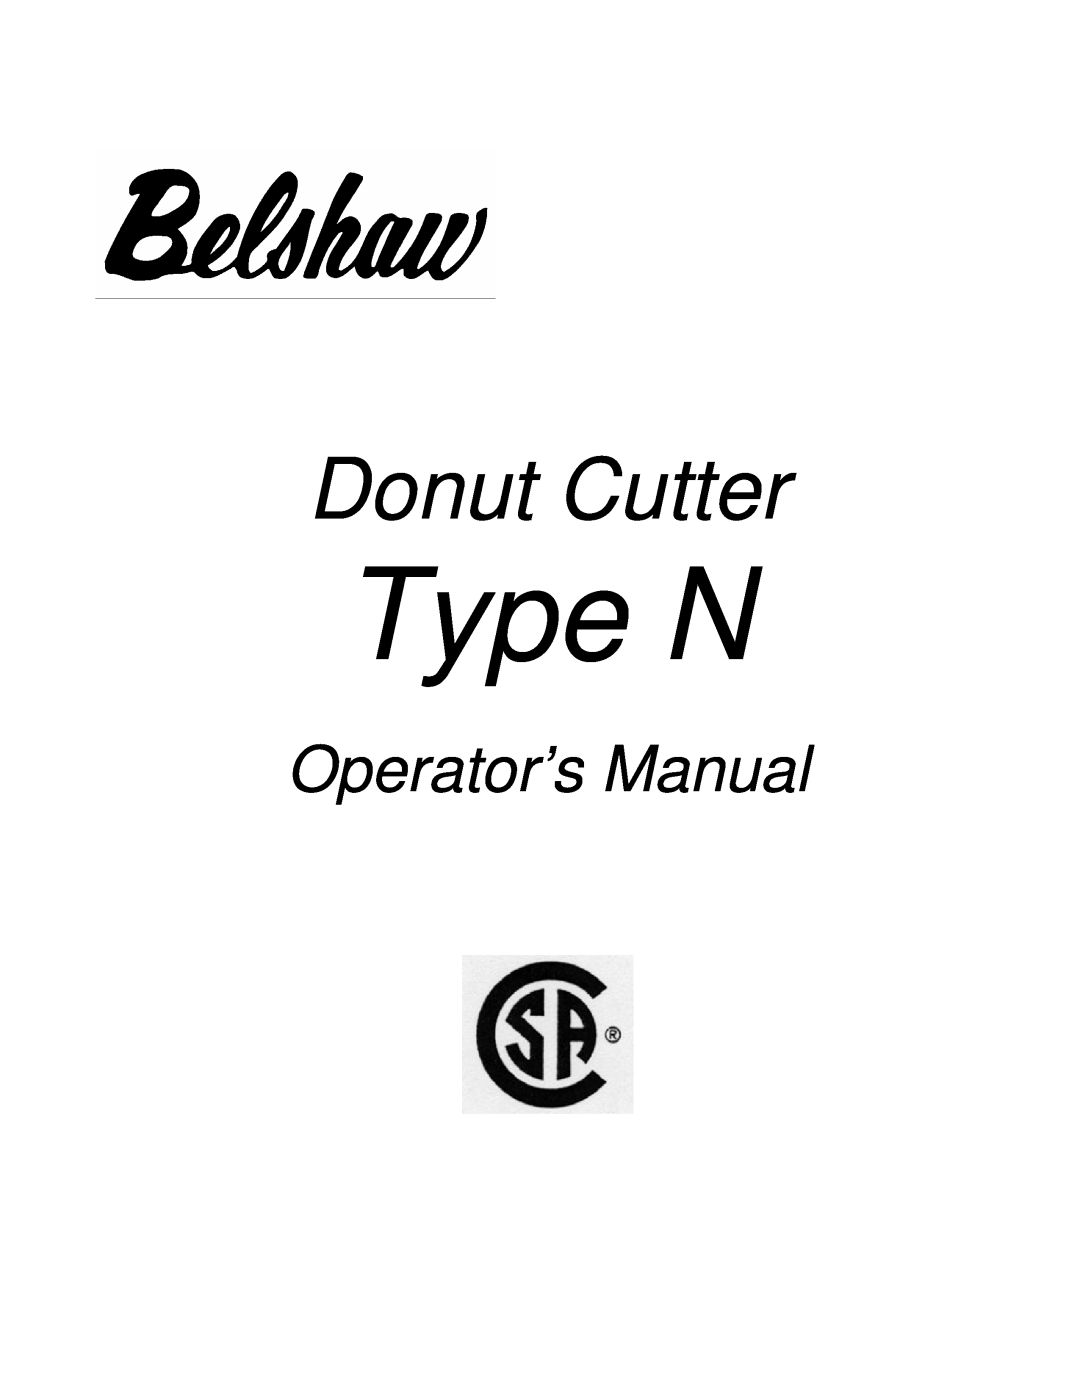 Belshaw Brothers 616BT manual Type N, Donut Cutter, Operator’s Manual 